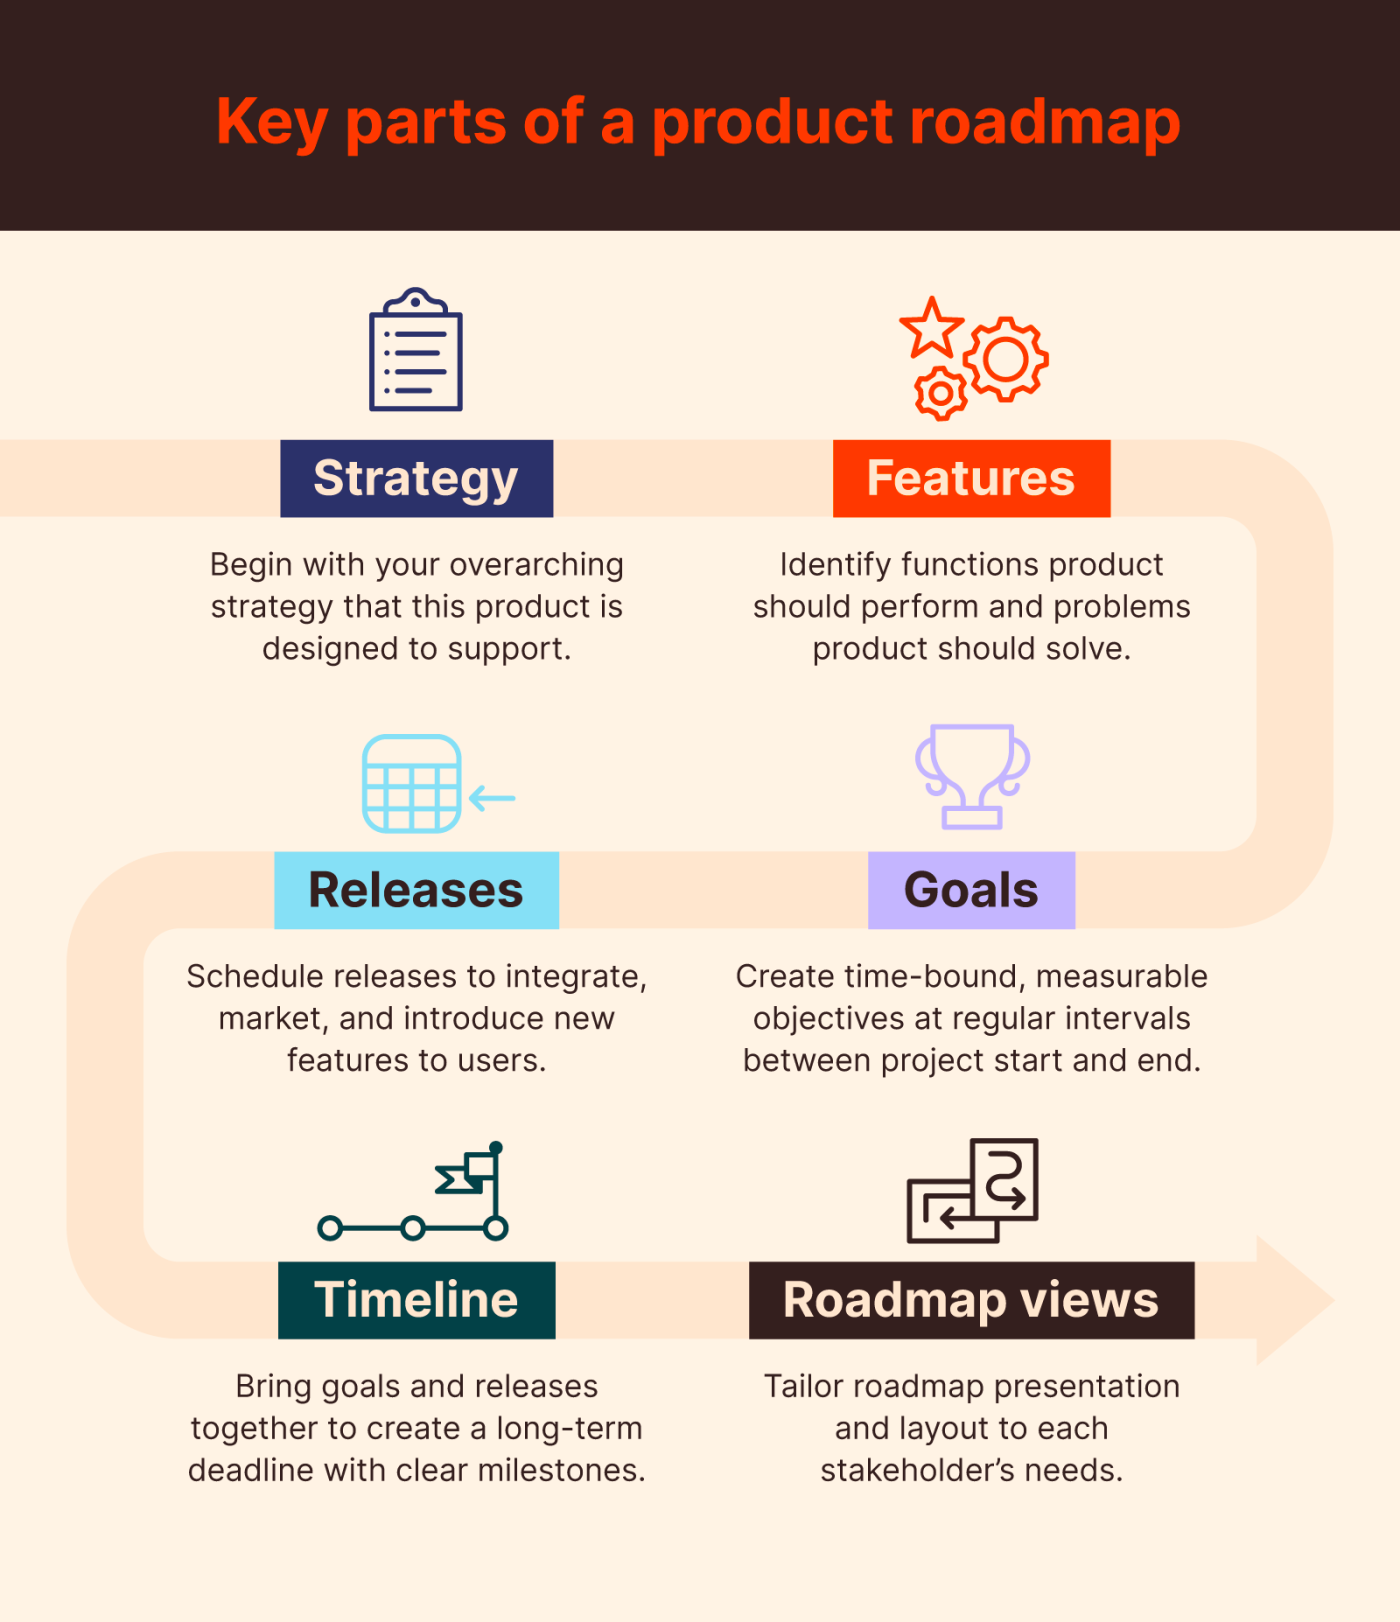 Key parts of a product roadmap: strategy, features, releases, goals, timeline, and roadmap views